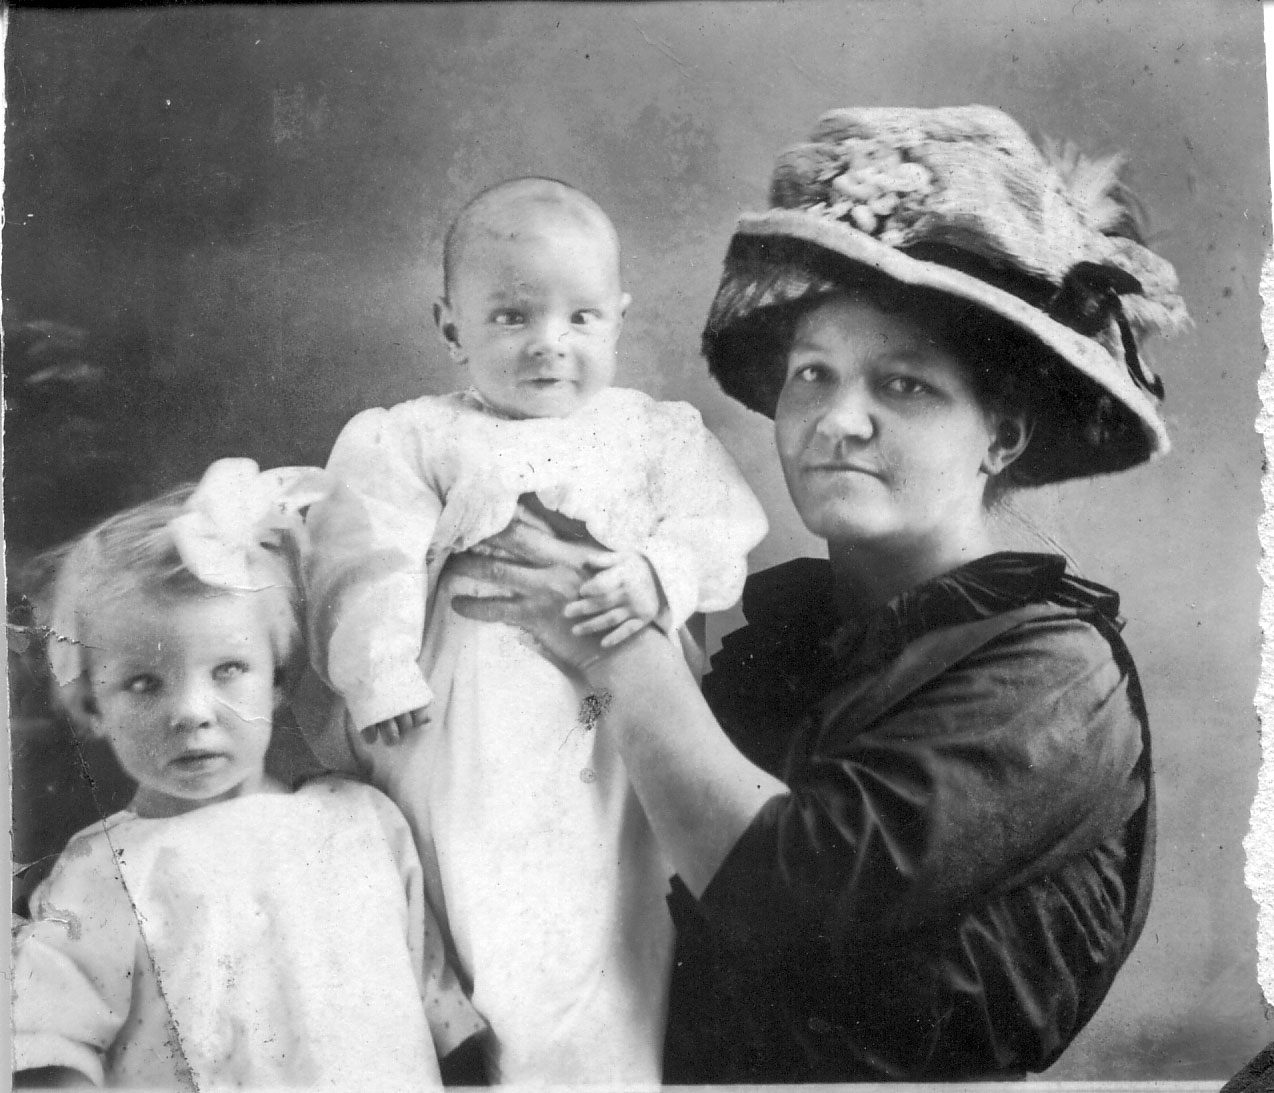 Another from my paternal grandmother's collection. Unknown which family members they are but both kids appear to be cross-eyed. Baby doesn't seem to mind though and mom is still proud. View full size.